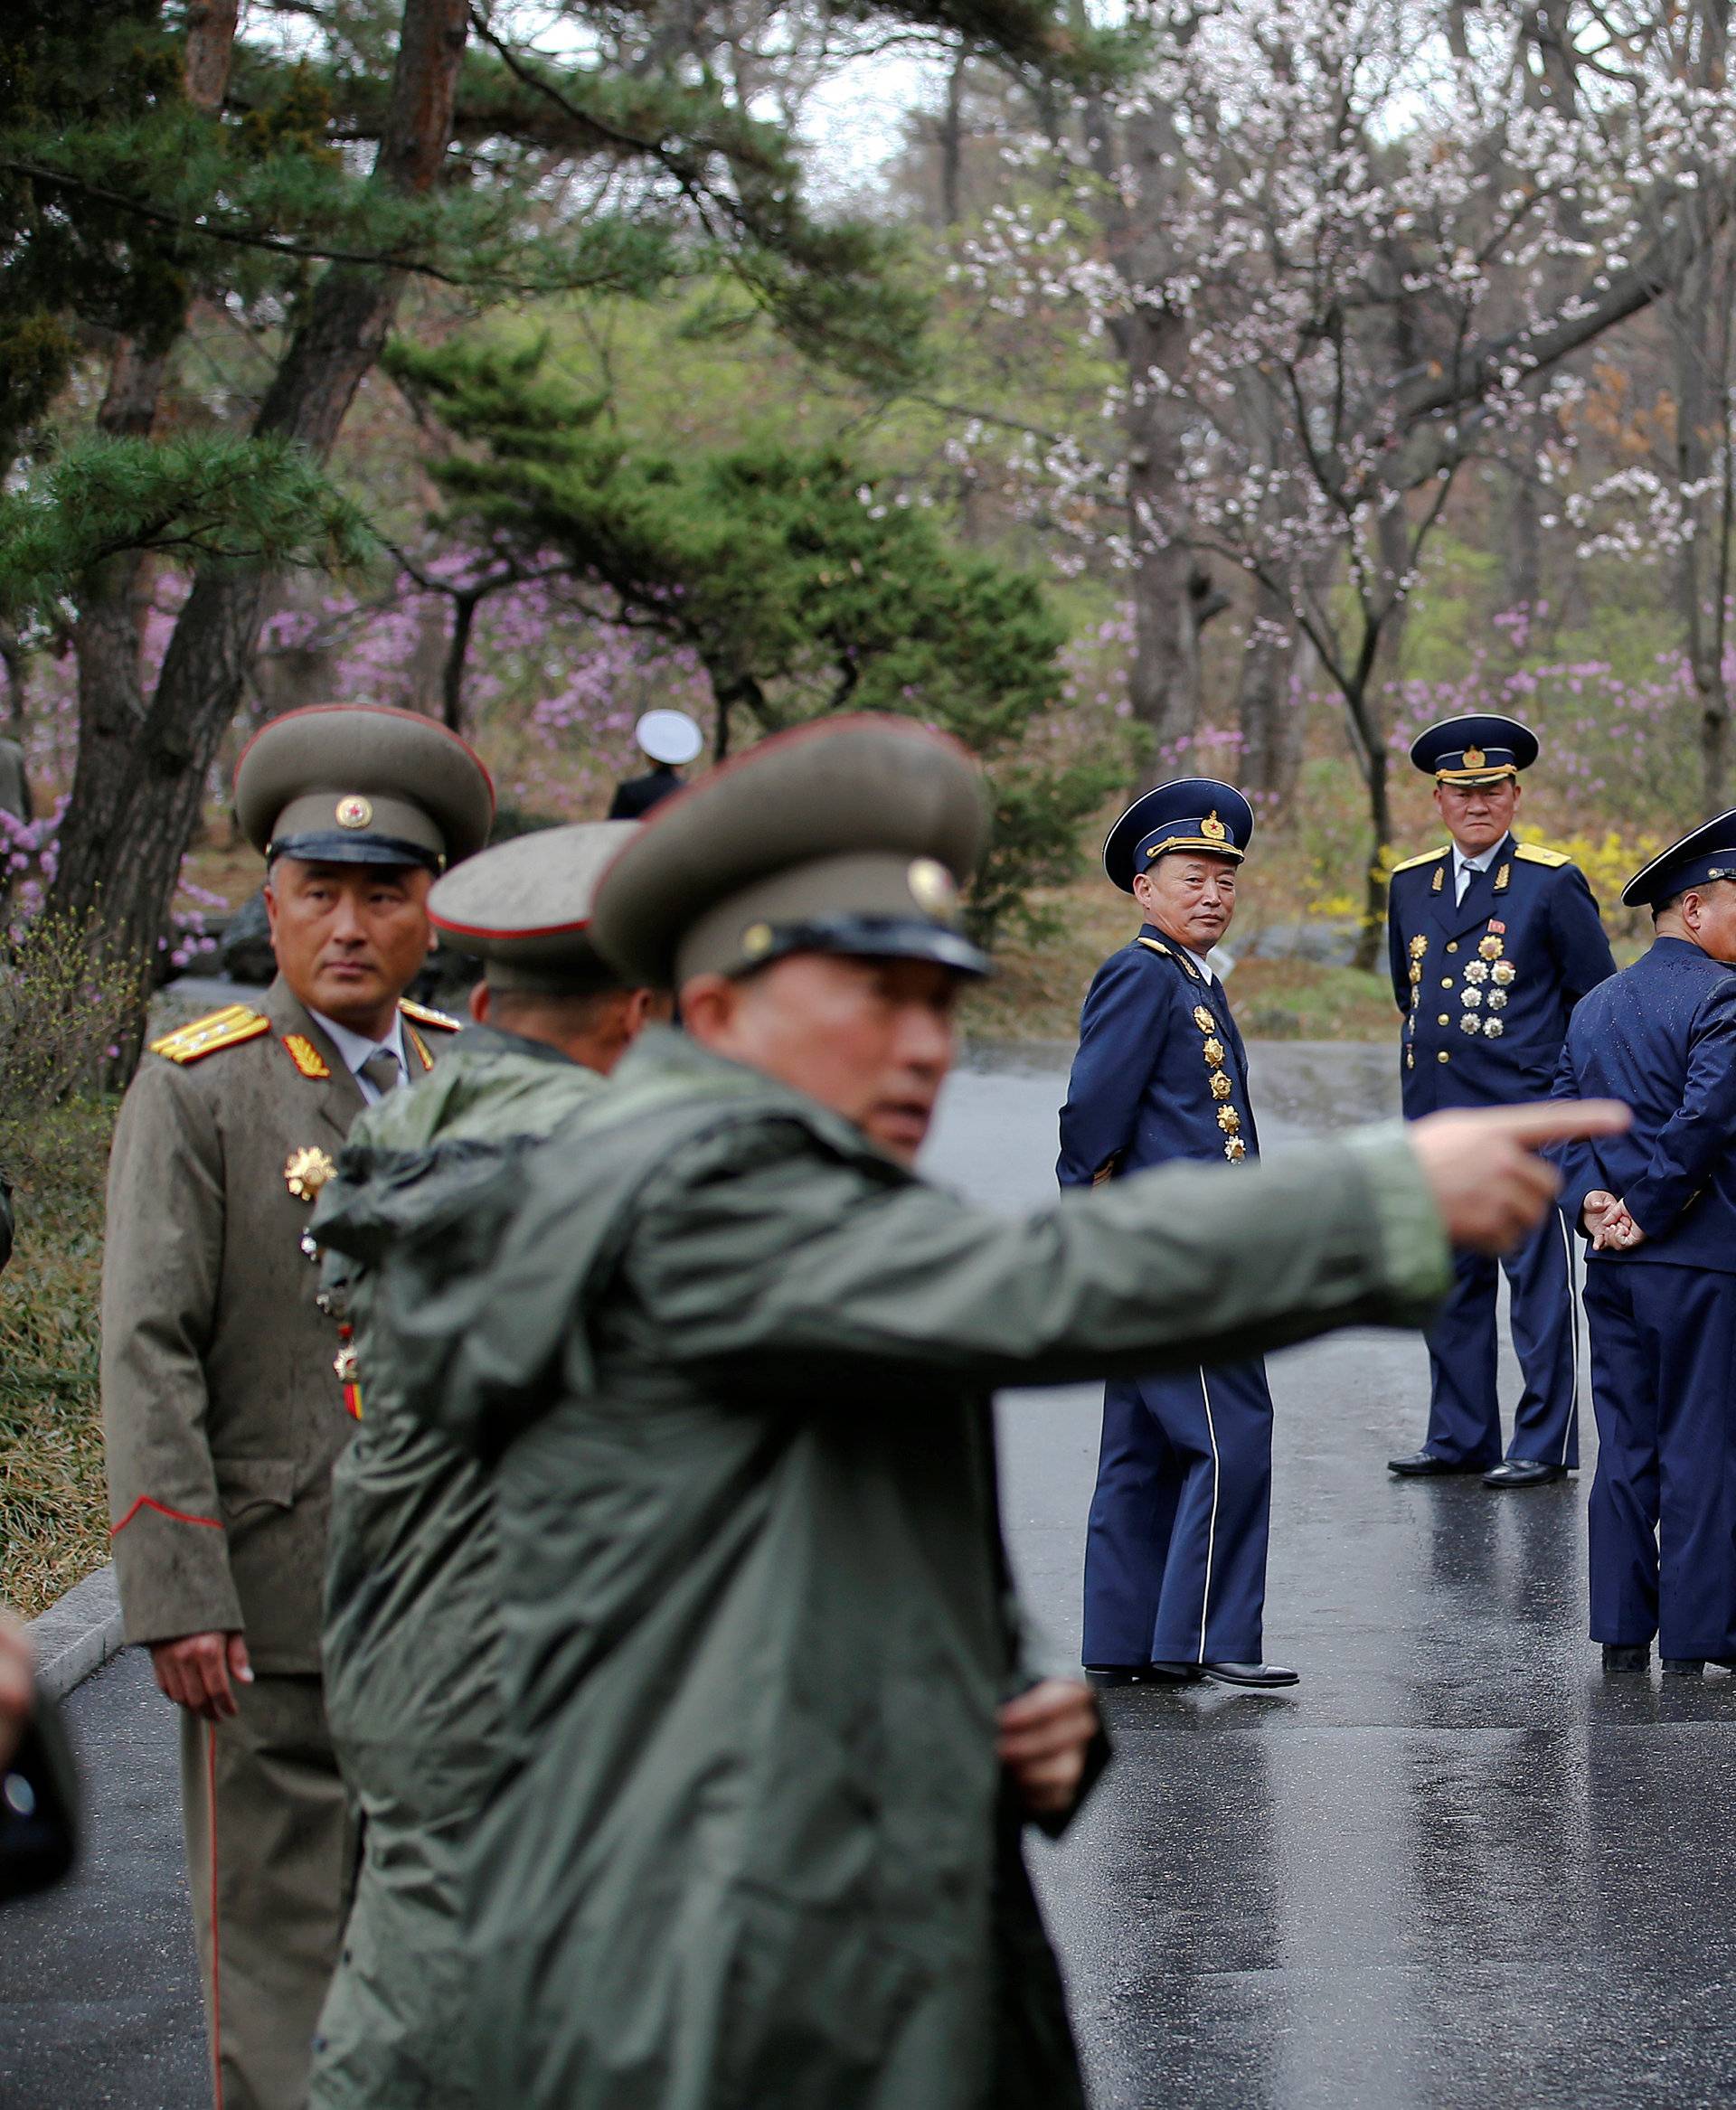 Military officers visit the birthplace of North Korean founder Kim Il Sung, a day before the 105th anniversary of his birth, in Mangyongdae, just outside Pyongyang